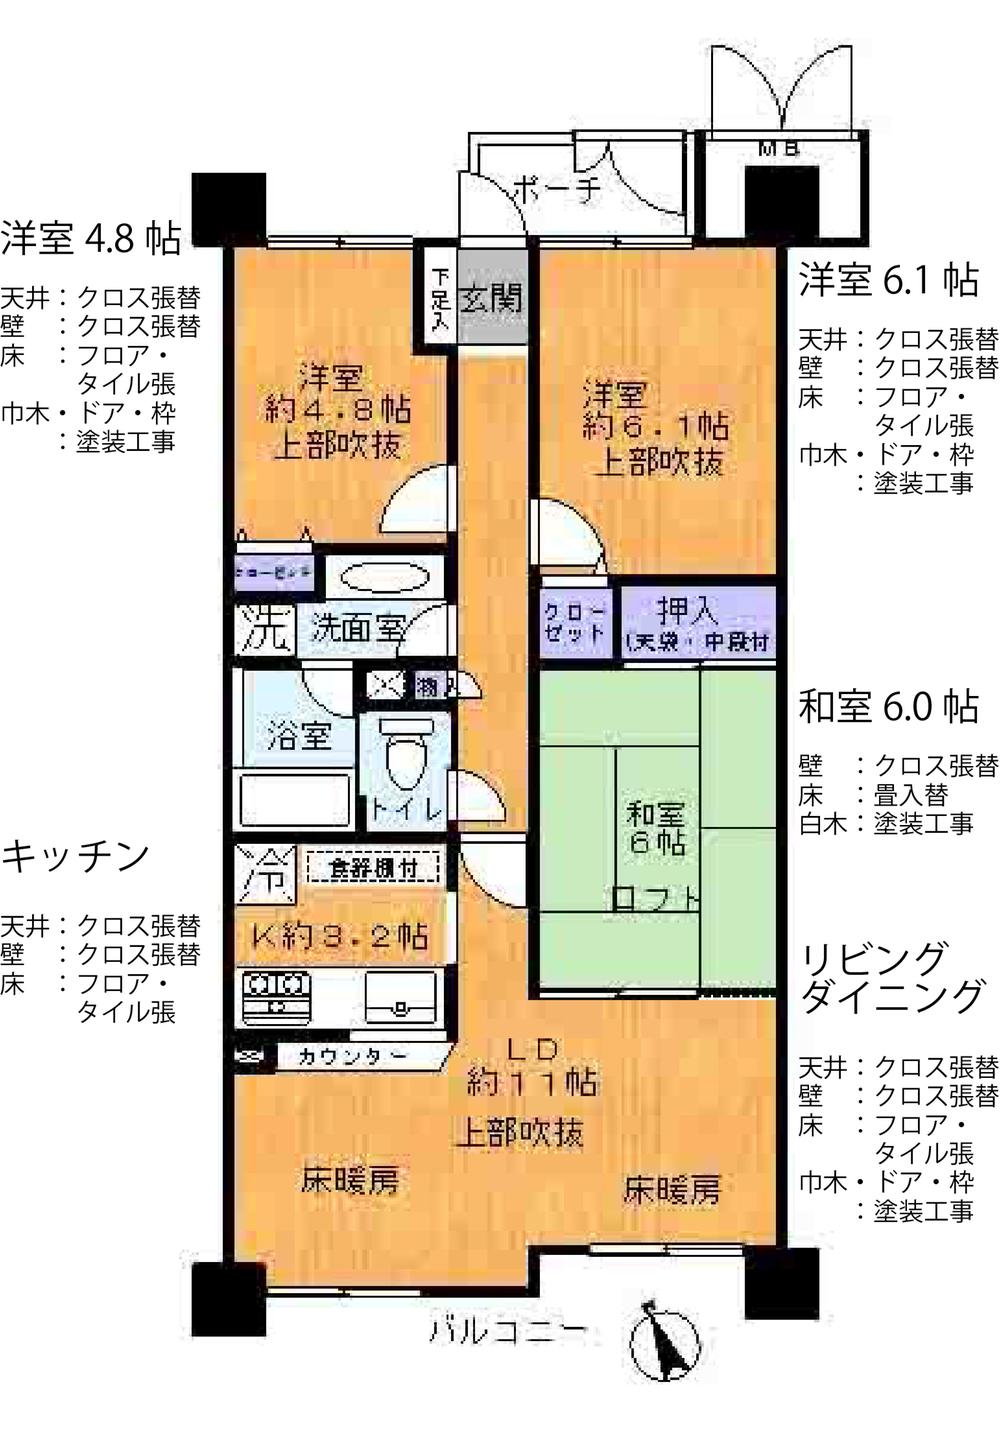 Floor plan. 3LDK + S (storeroom), Price 15.5 million yen, Occupied area 68.12 sq m , Balcony area 10.28 sq m south balcony has a good day, It has become a very bright living room.